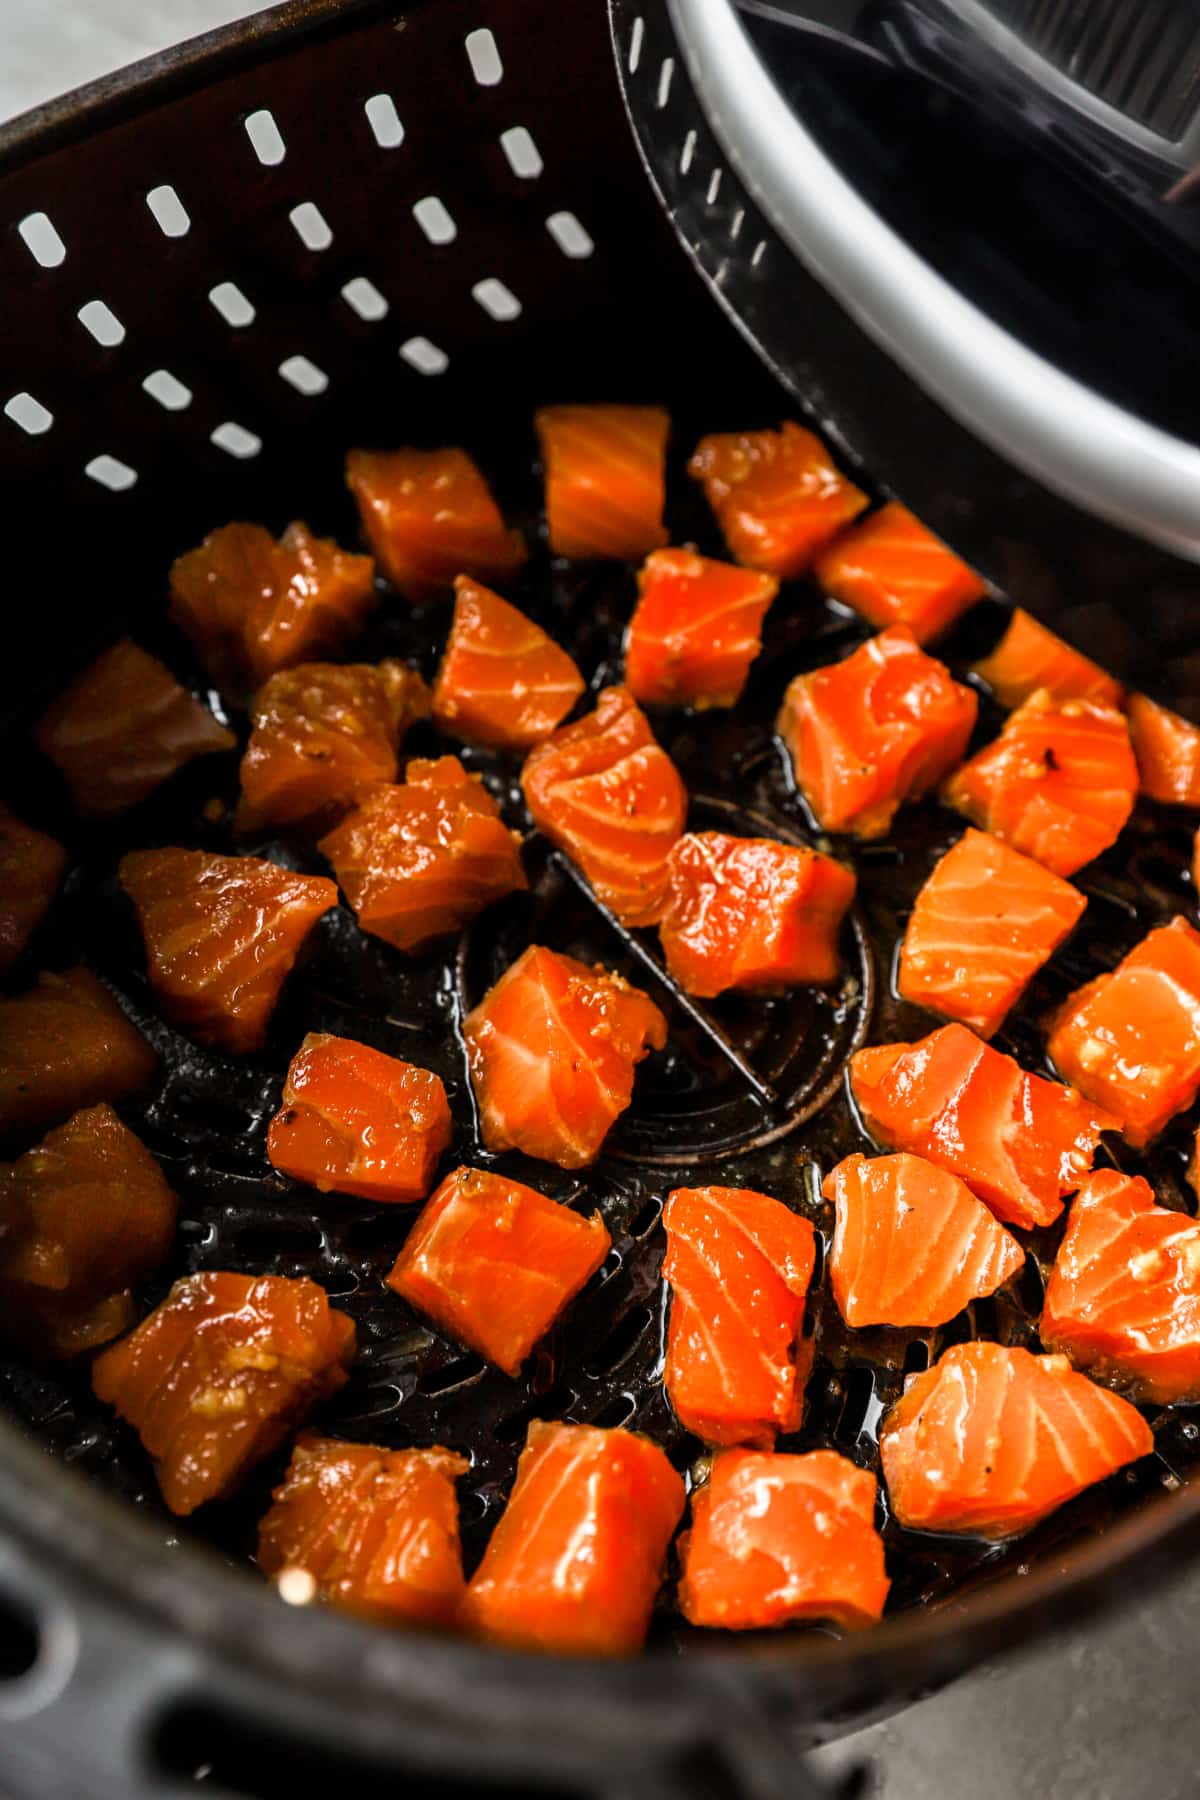 cubed salmon pieces in an air fryer basket.